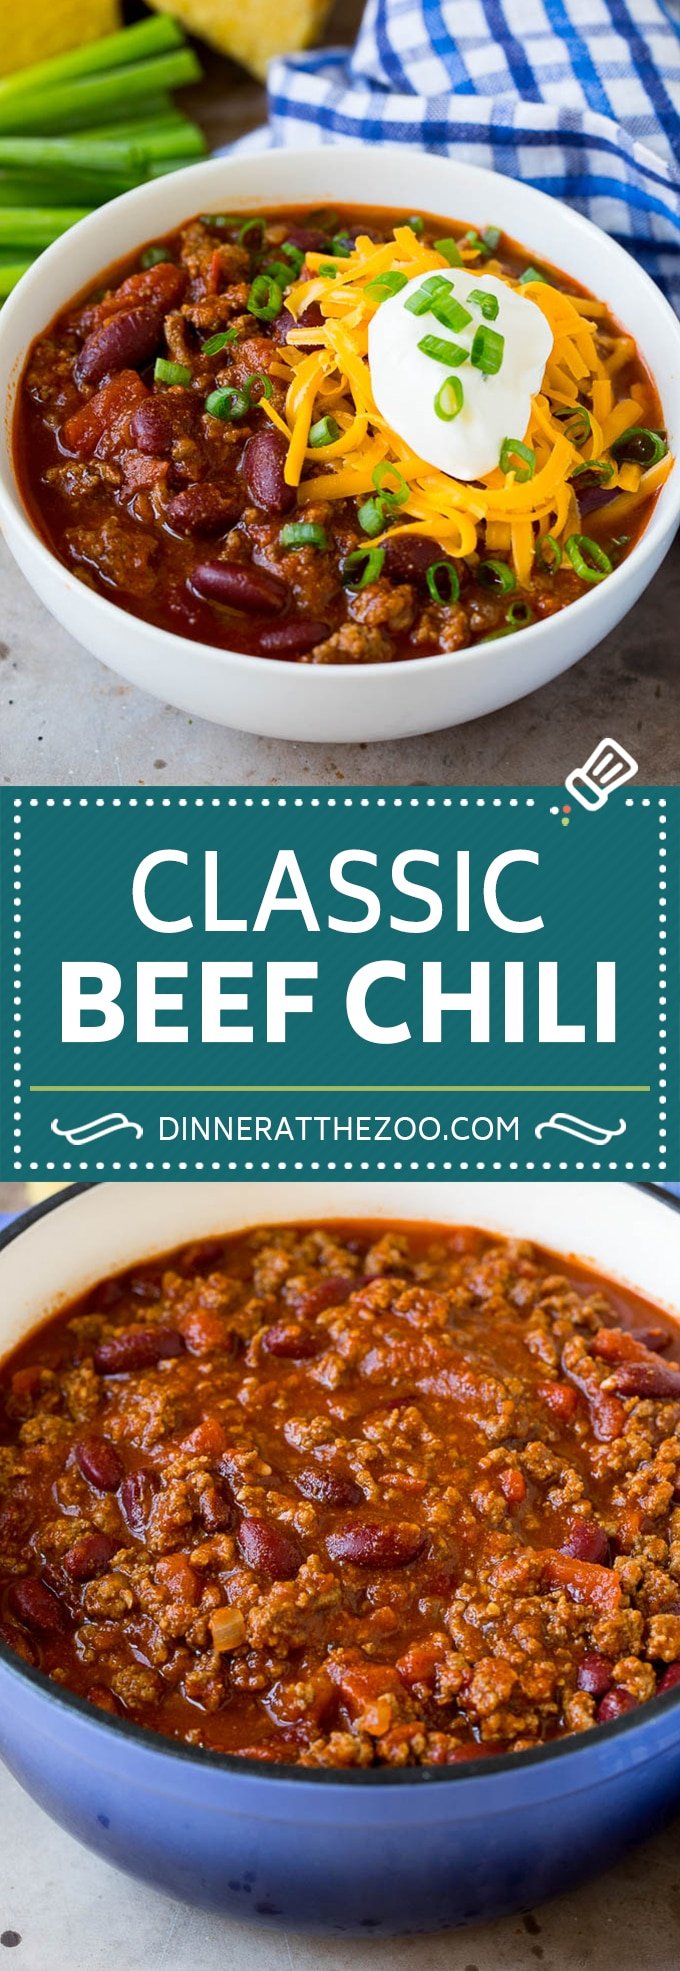 This beef chili is a blend of meat, tomatoes, spices and beans, all simmered together to make a delicious and hearty meal.